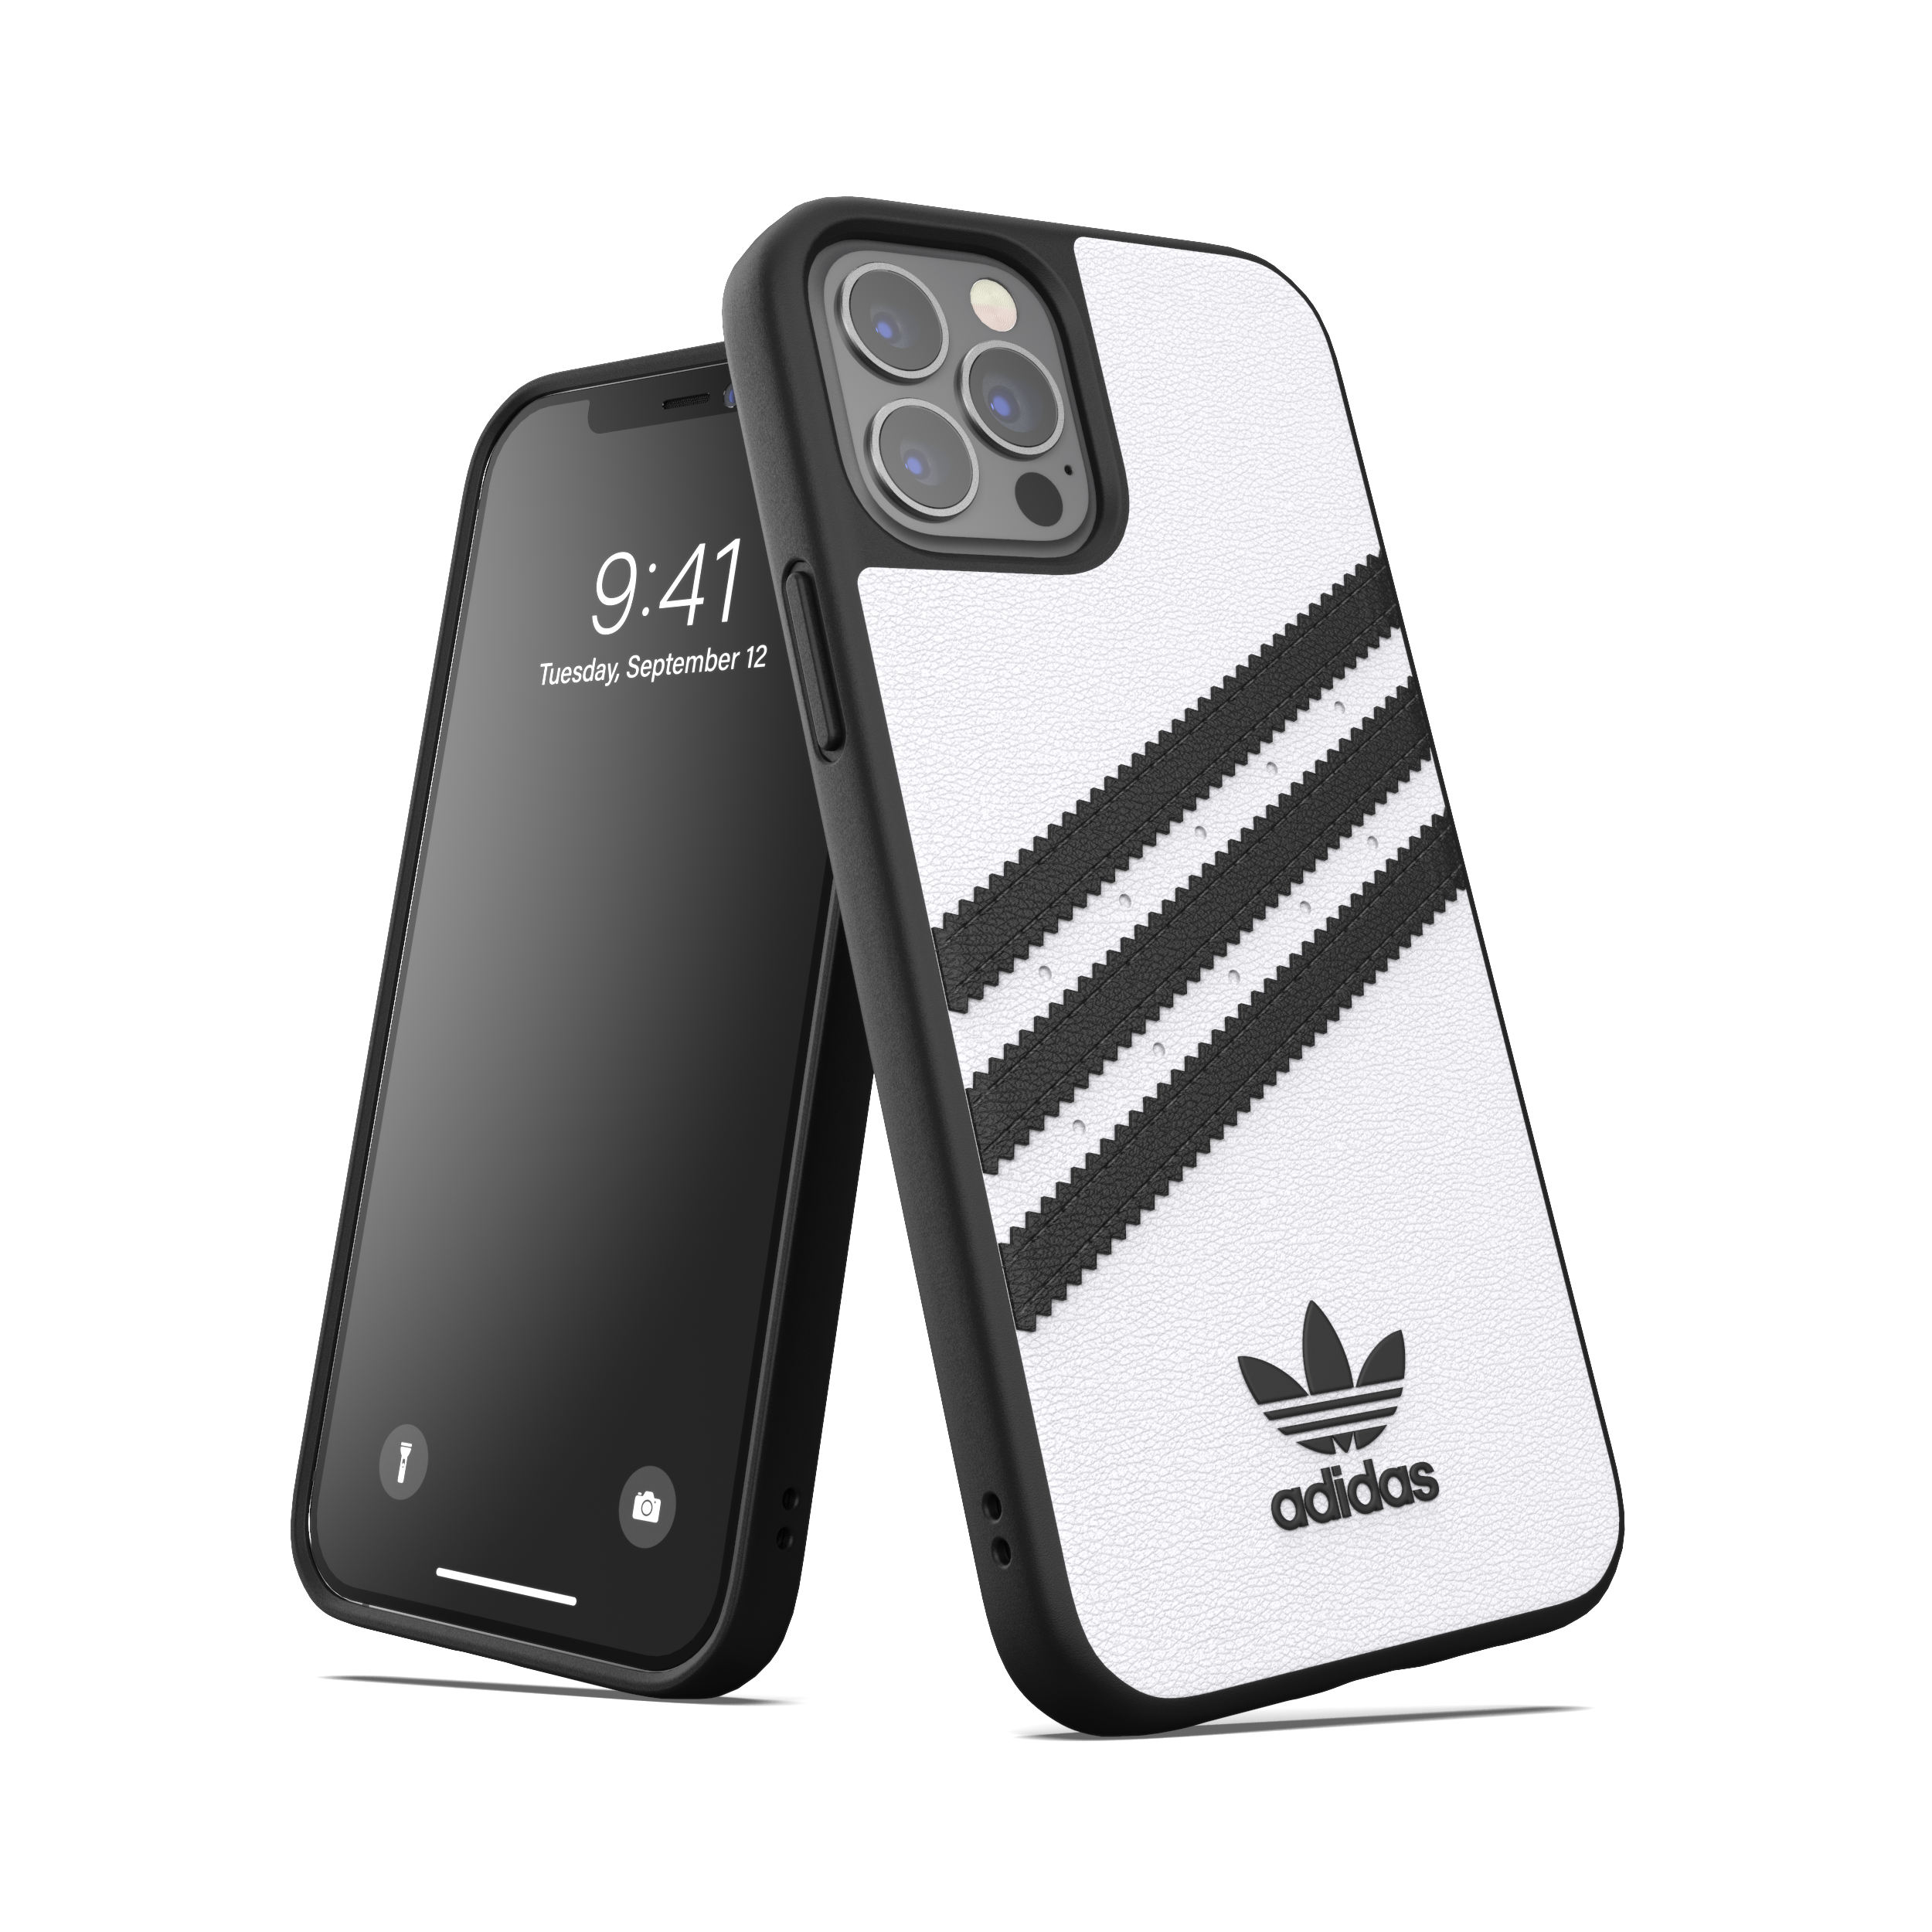 ADIDAS ORIGINALS Moulded Case, Backcover, iPhone Pro, 12, Weiß/Schwarz 12 iPhone Apple